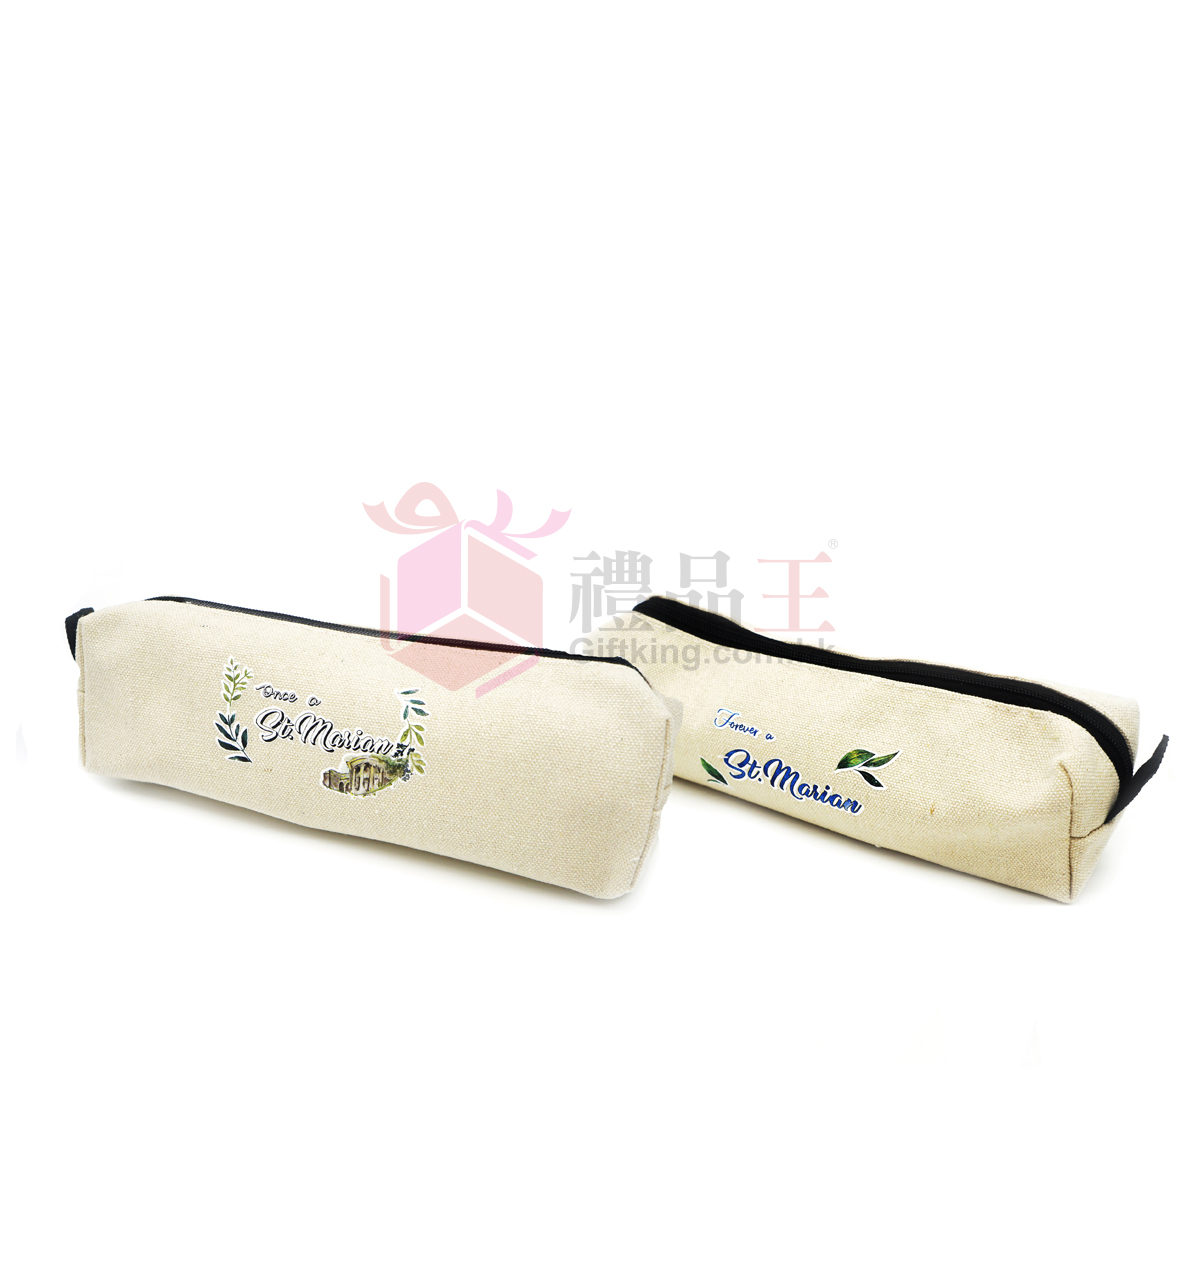 St.mary's Canossian School pencil case (Stationery gift)